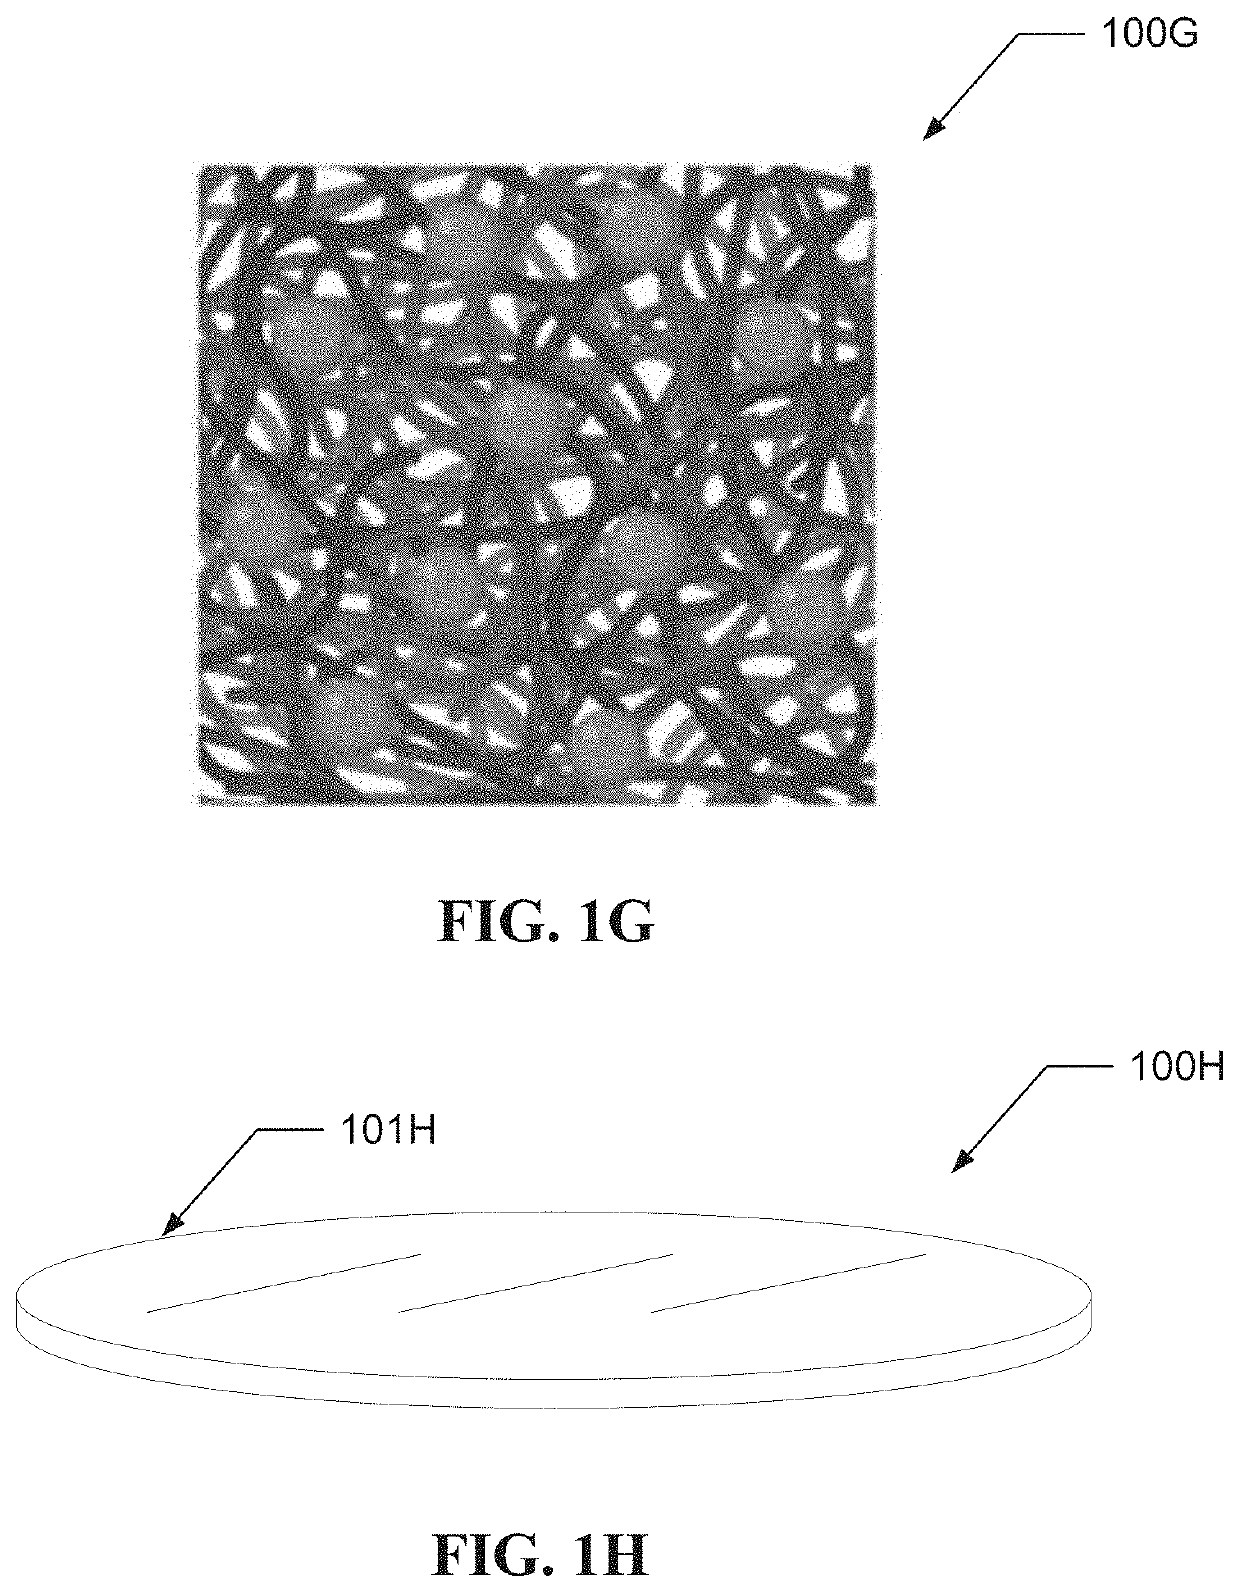 Uniaxially-aligned nanofiber scaffolds and methods for producing and using same